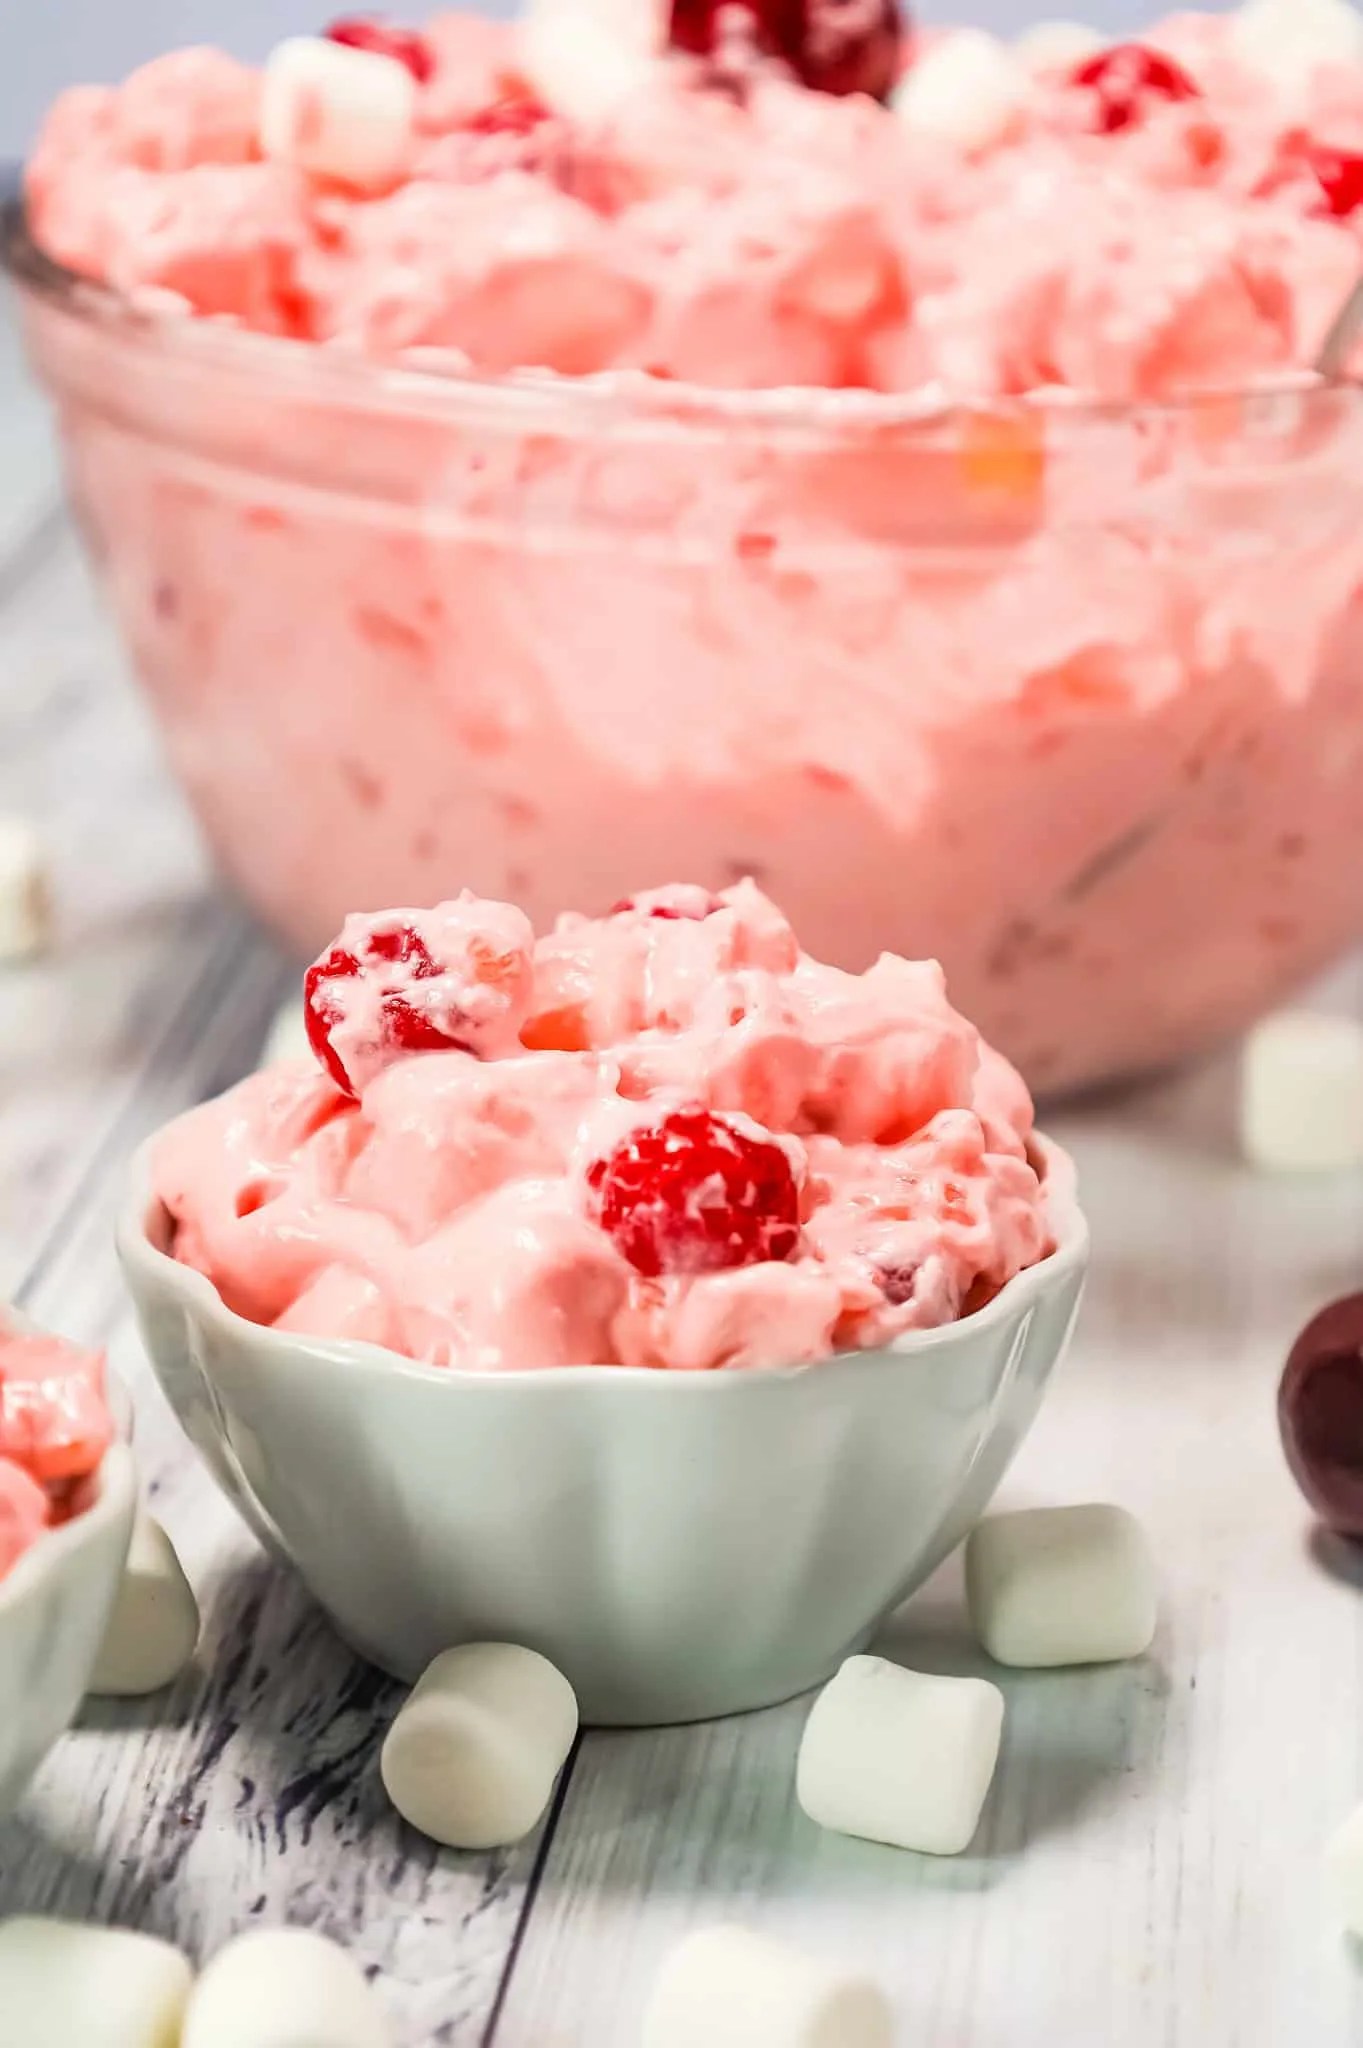 Cherry Fluff is an easy no bake dessert or side dish recipe made with cherry pie filling, crushed pineapple, instant vanilla pudding mix and Cool Whip and loaded with mini marshmallows.